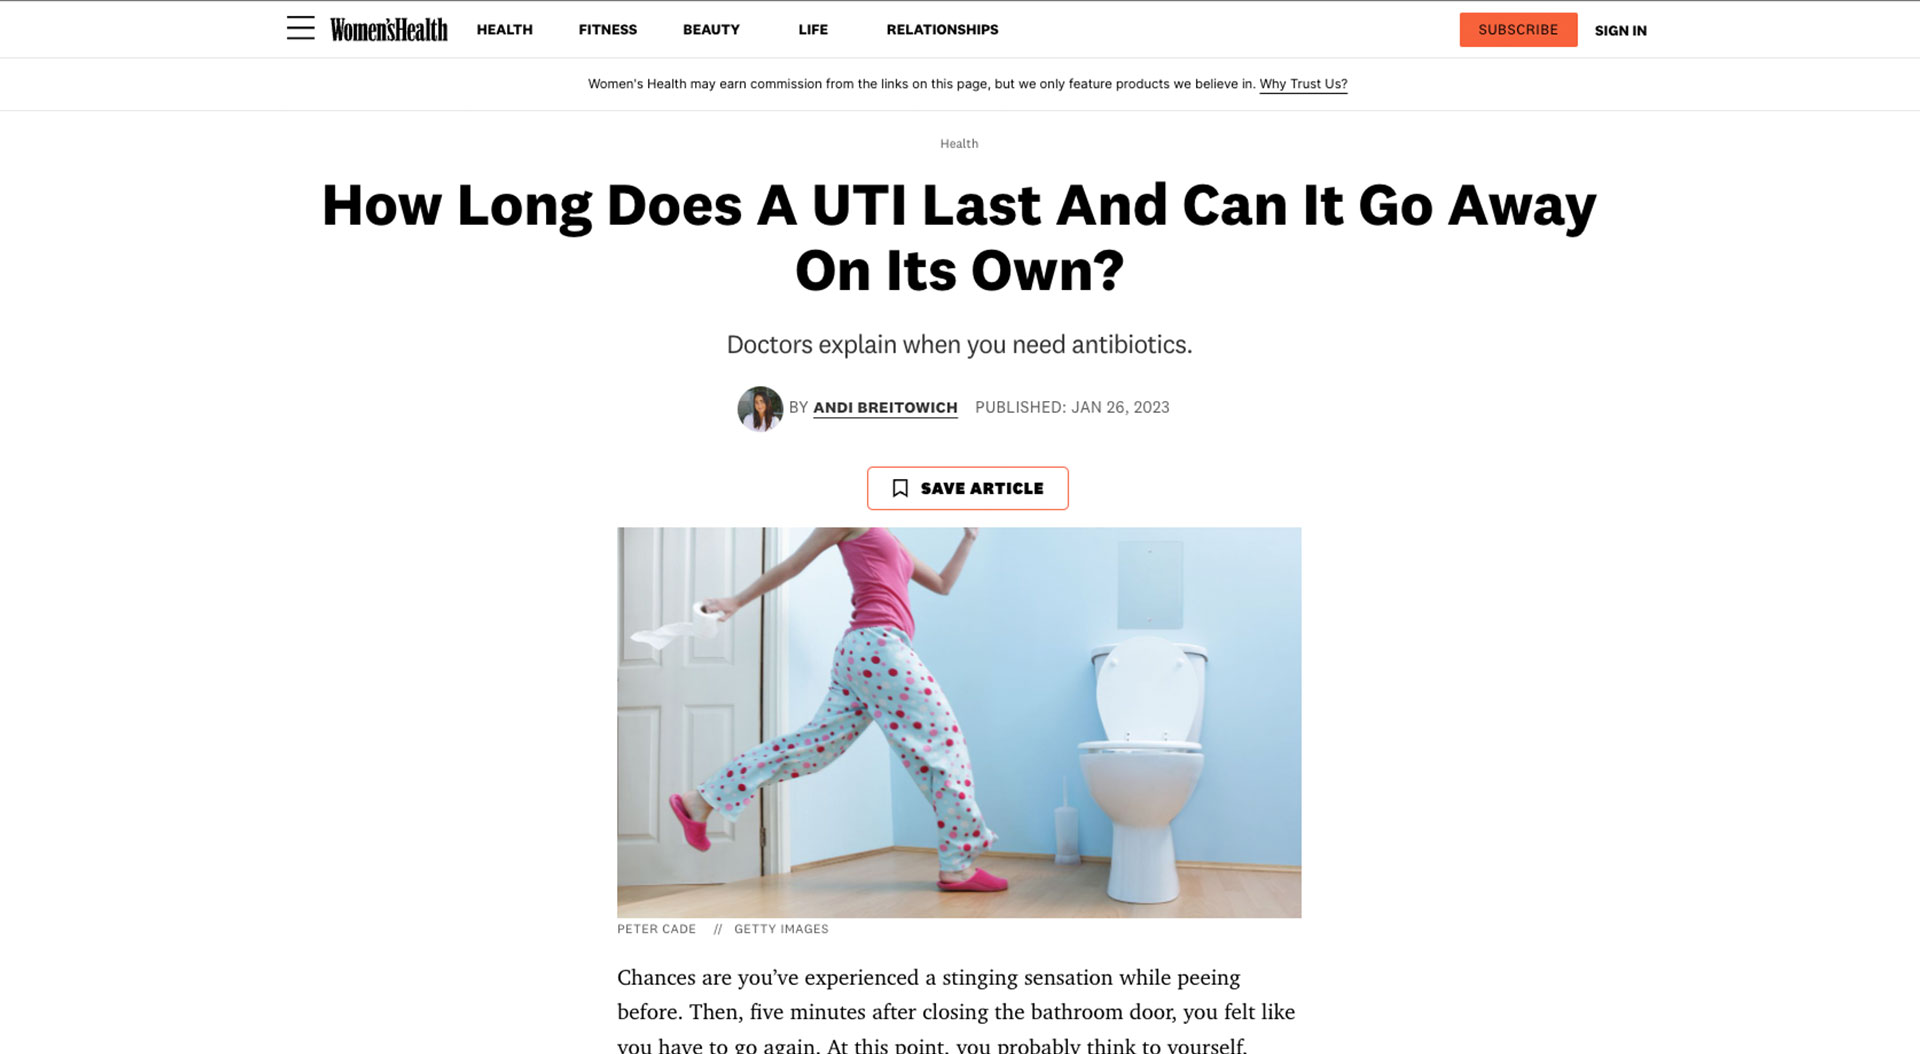 How Long Does A UTI Last And Can It Go Away On Its Own?